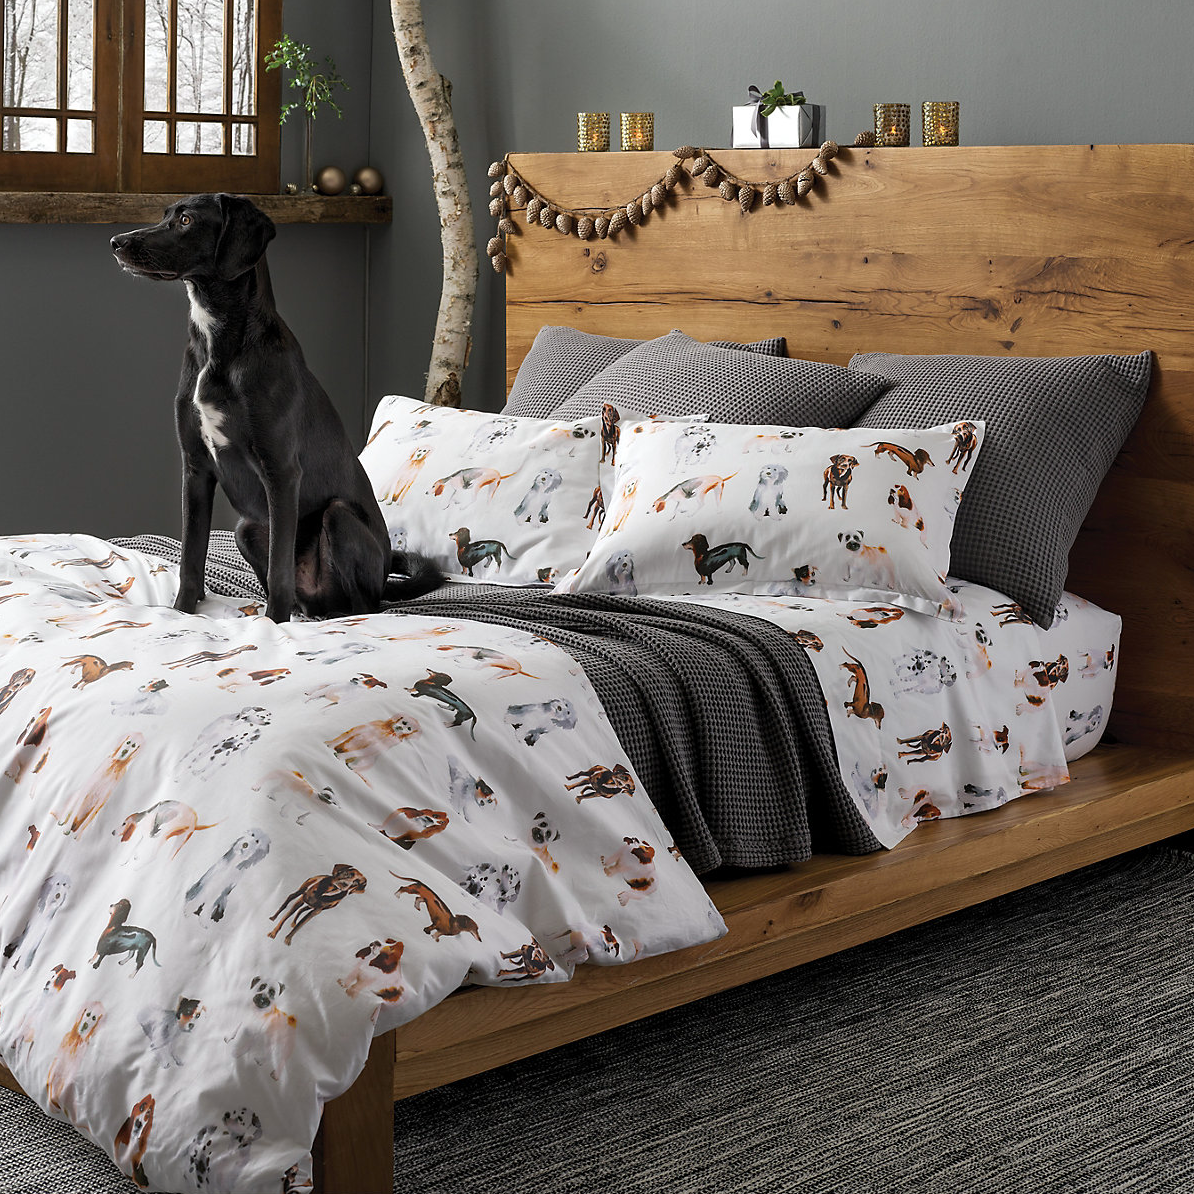 The Pup Pack Sheet Set